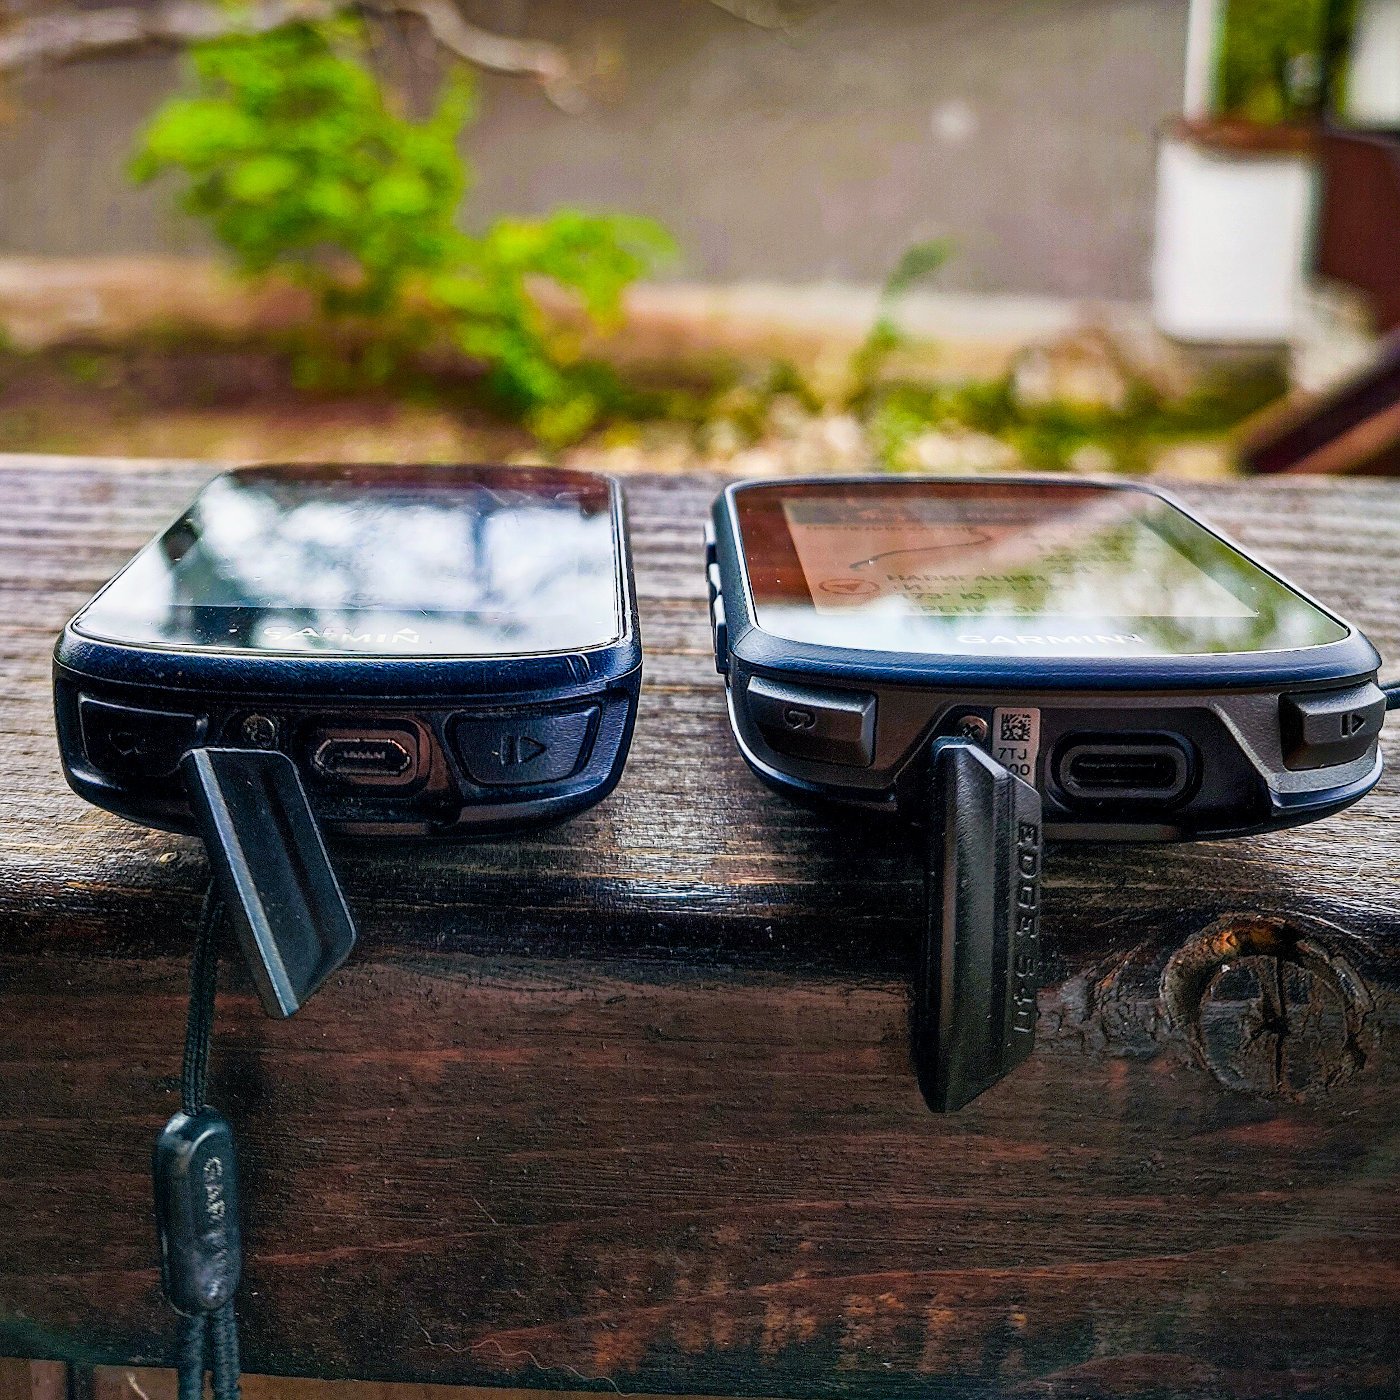 Garmin Edge 540 review - a step up in performance but also price